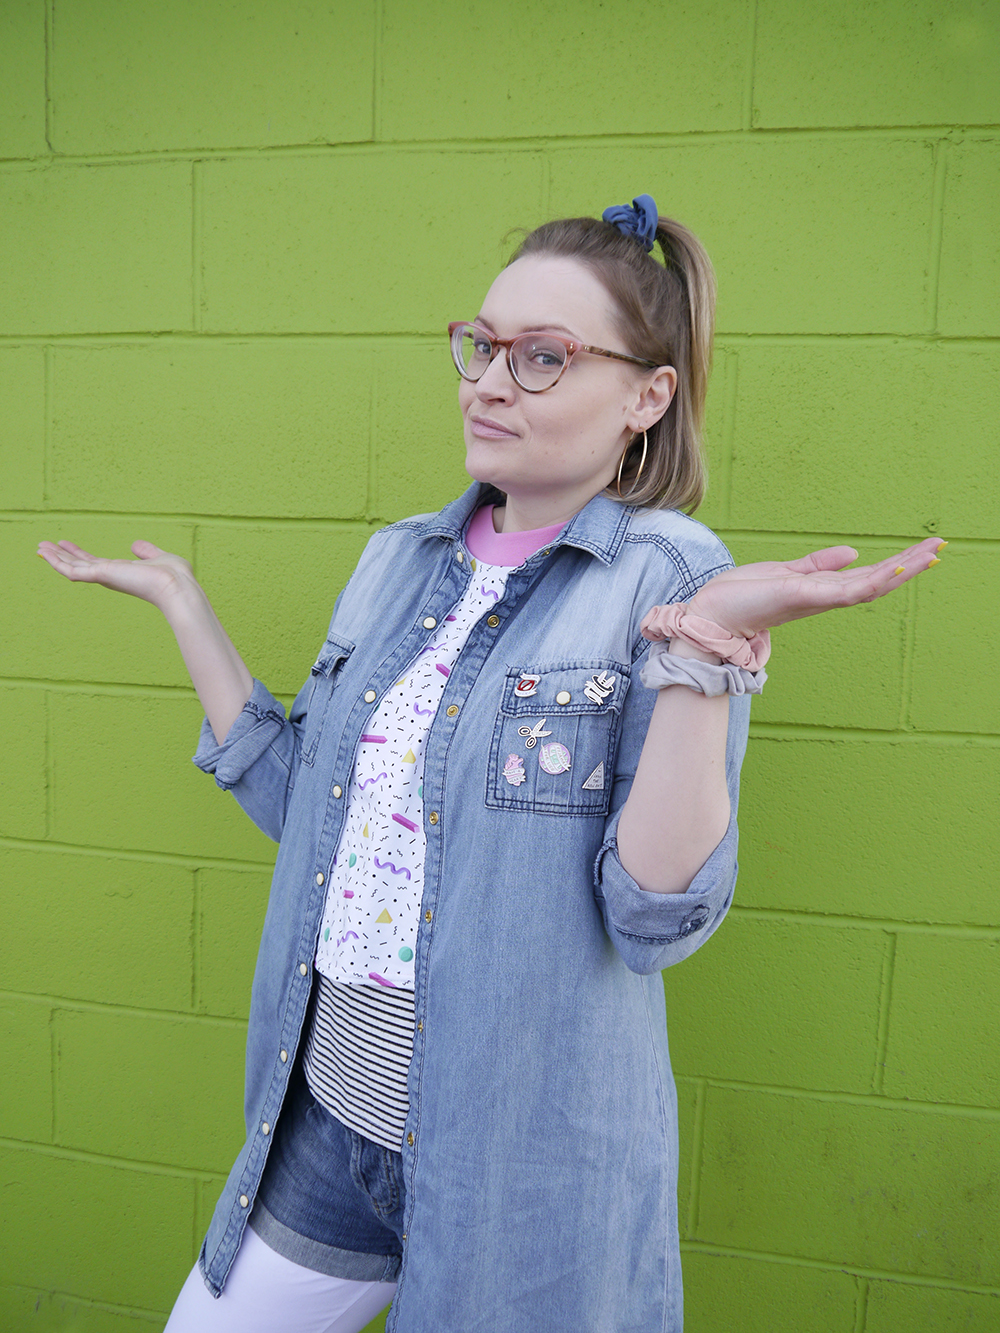 easy halloween costume: 90s Nickelodeon show Clarissa Explains It All with only 5 items